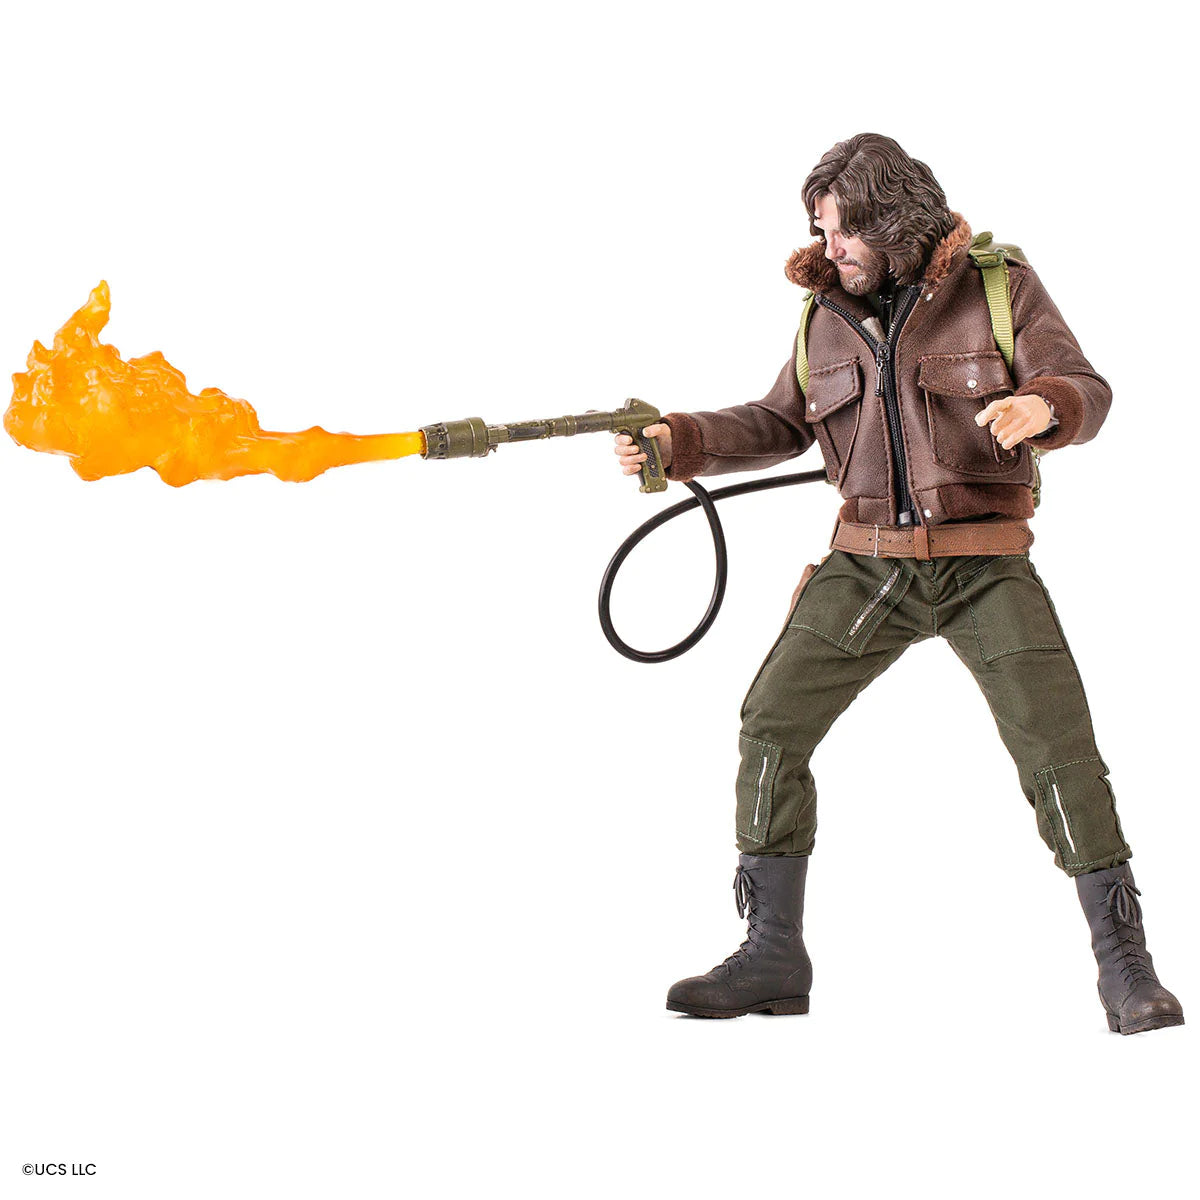 The Thing MacReady 1/6 Scale Figure by Mondo